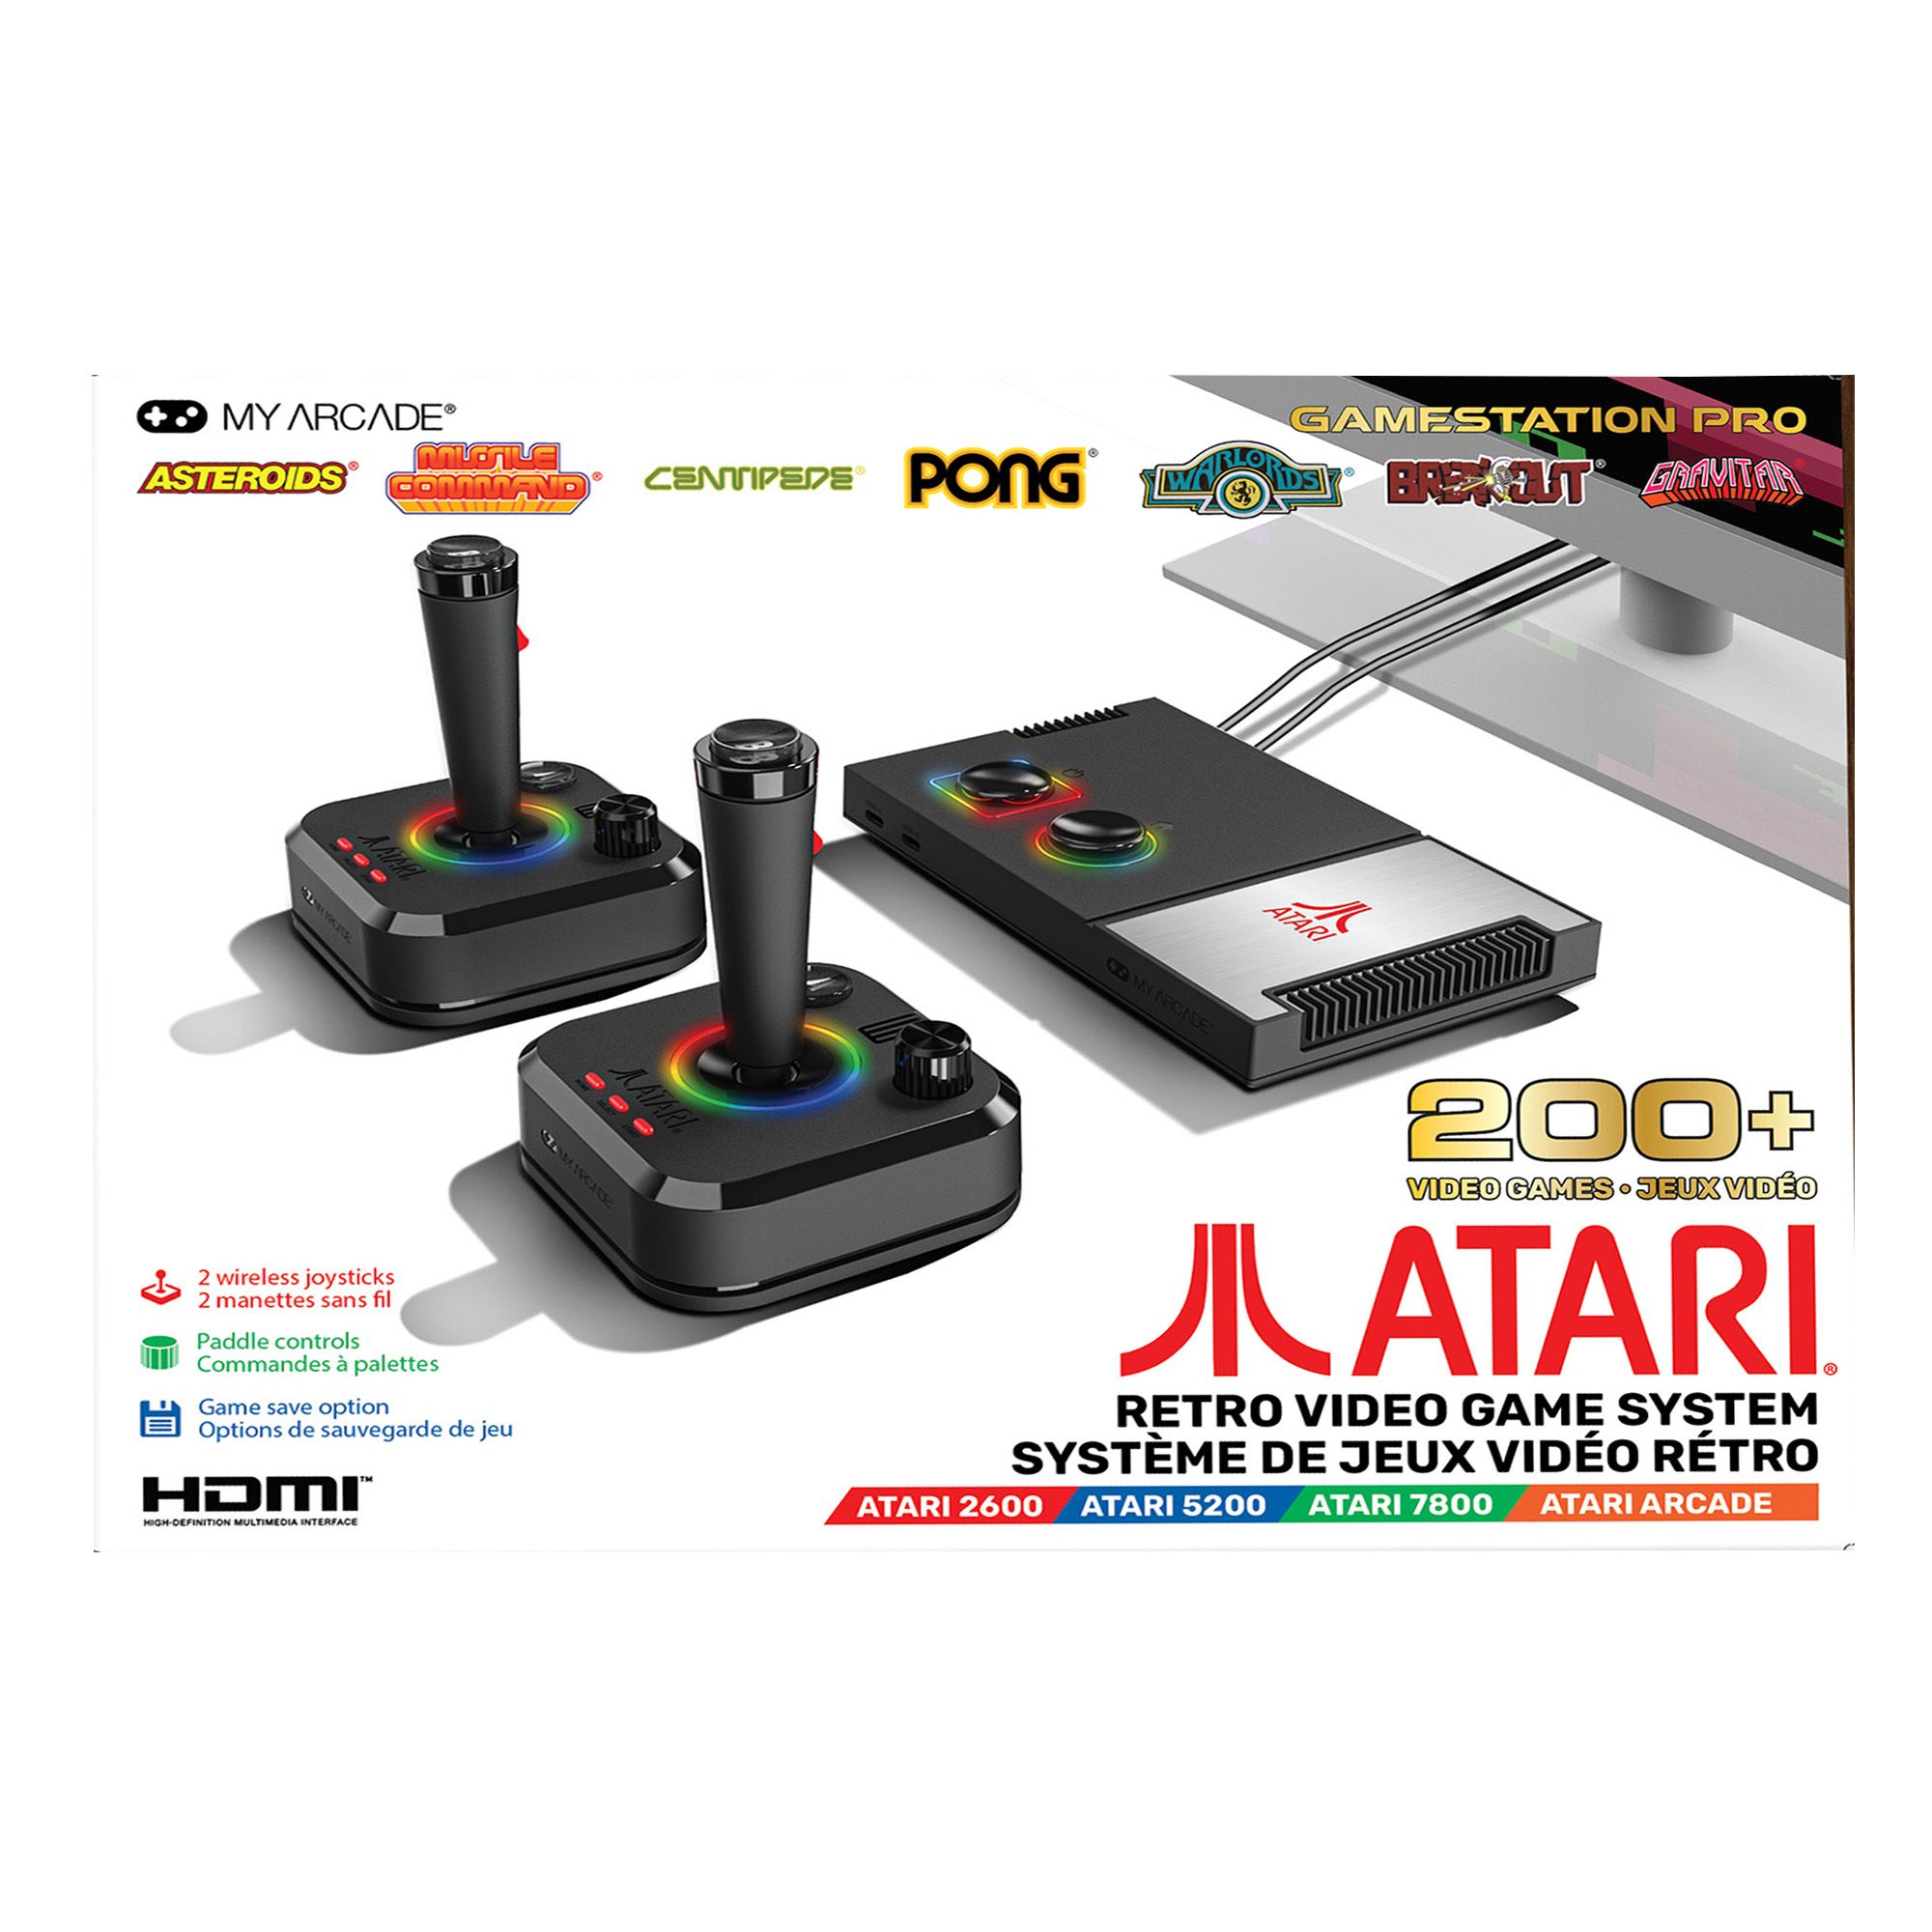  My Arcade Atari Game Station Pro: Video Game Console